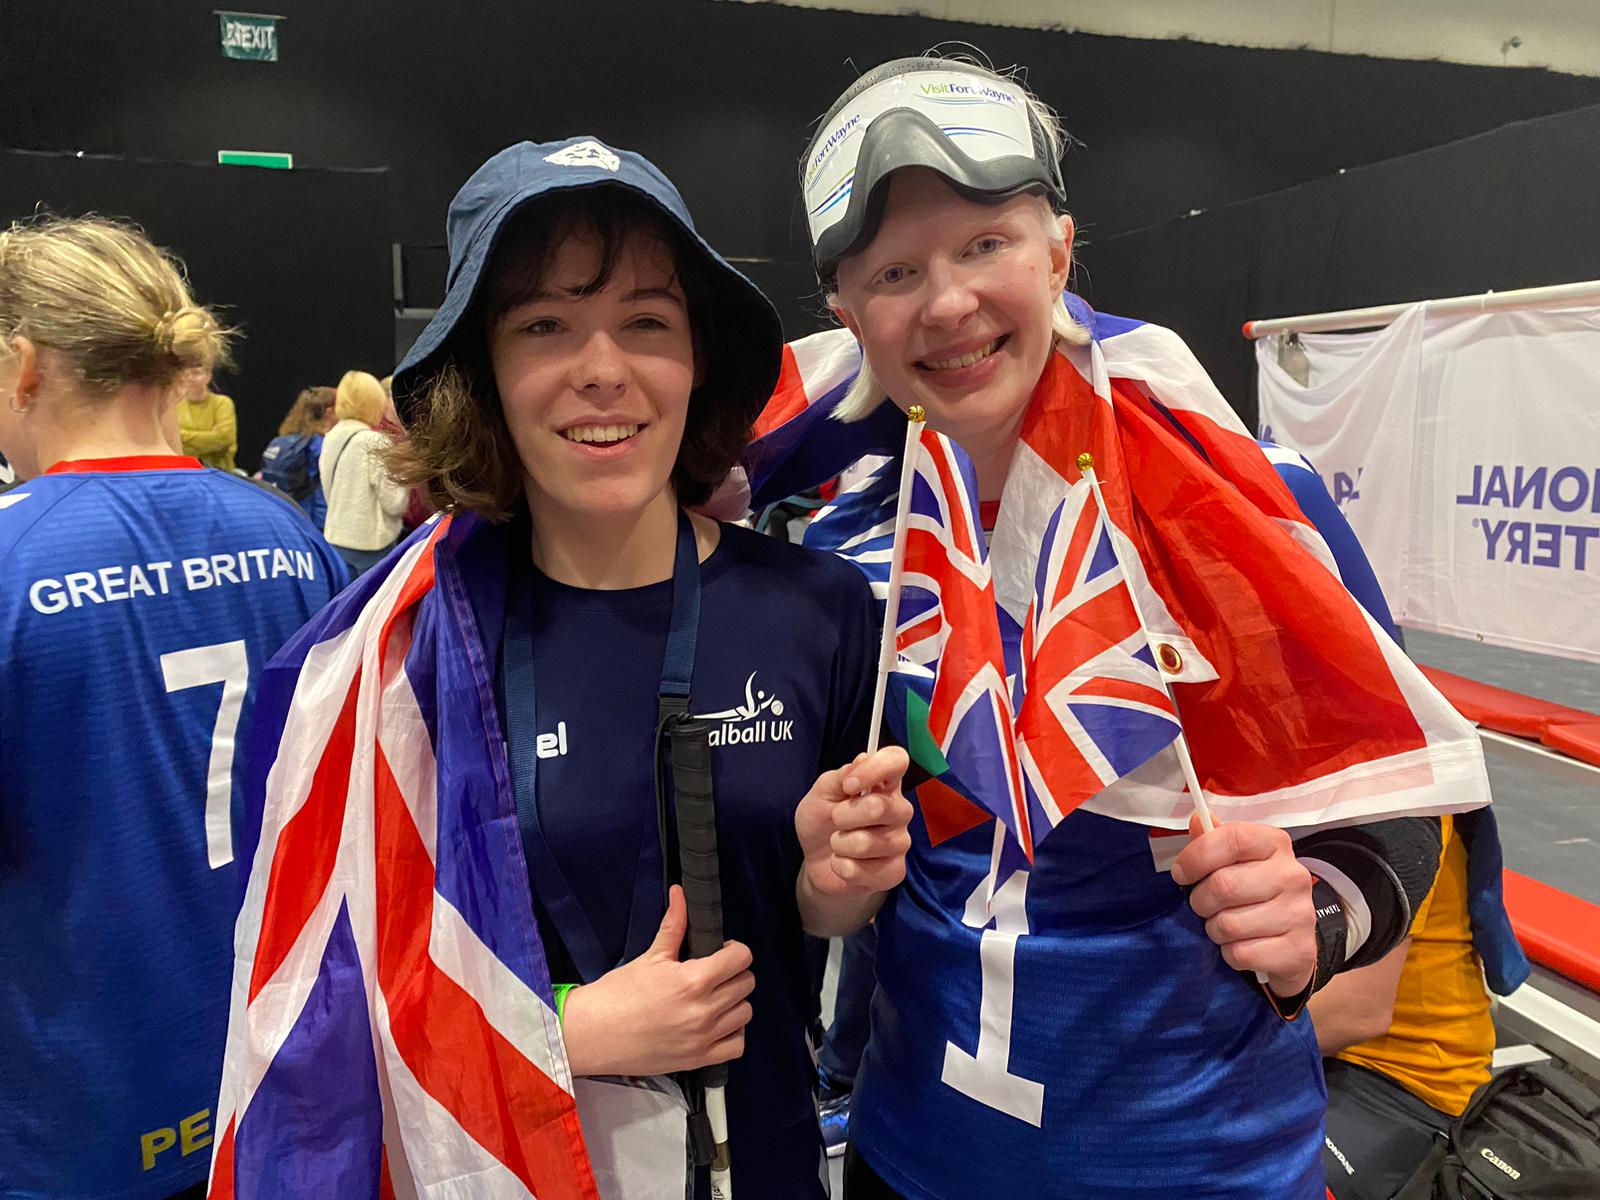 Sarah Leiter stands for a smiley photo with her team mate from Cambridge during the 2023 IBSA World Games. Sarah is dressed in GB kit and has a union jack draped around her and her friend